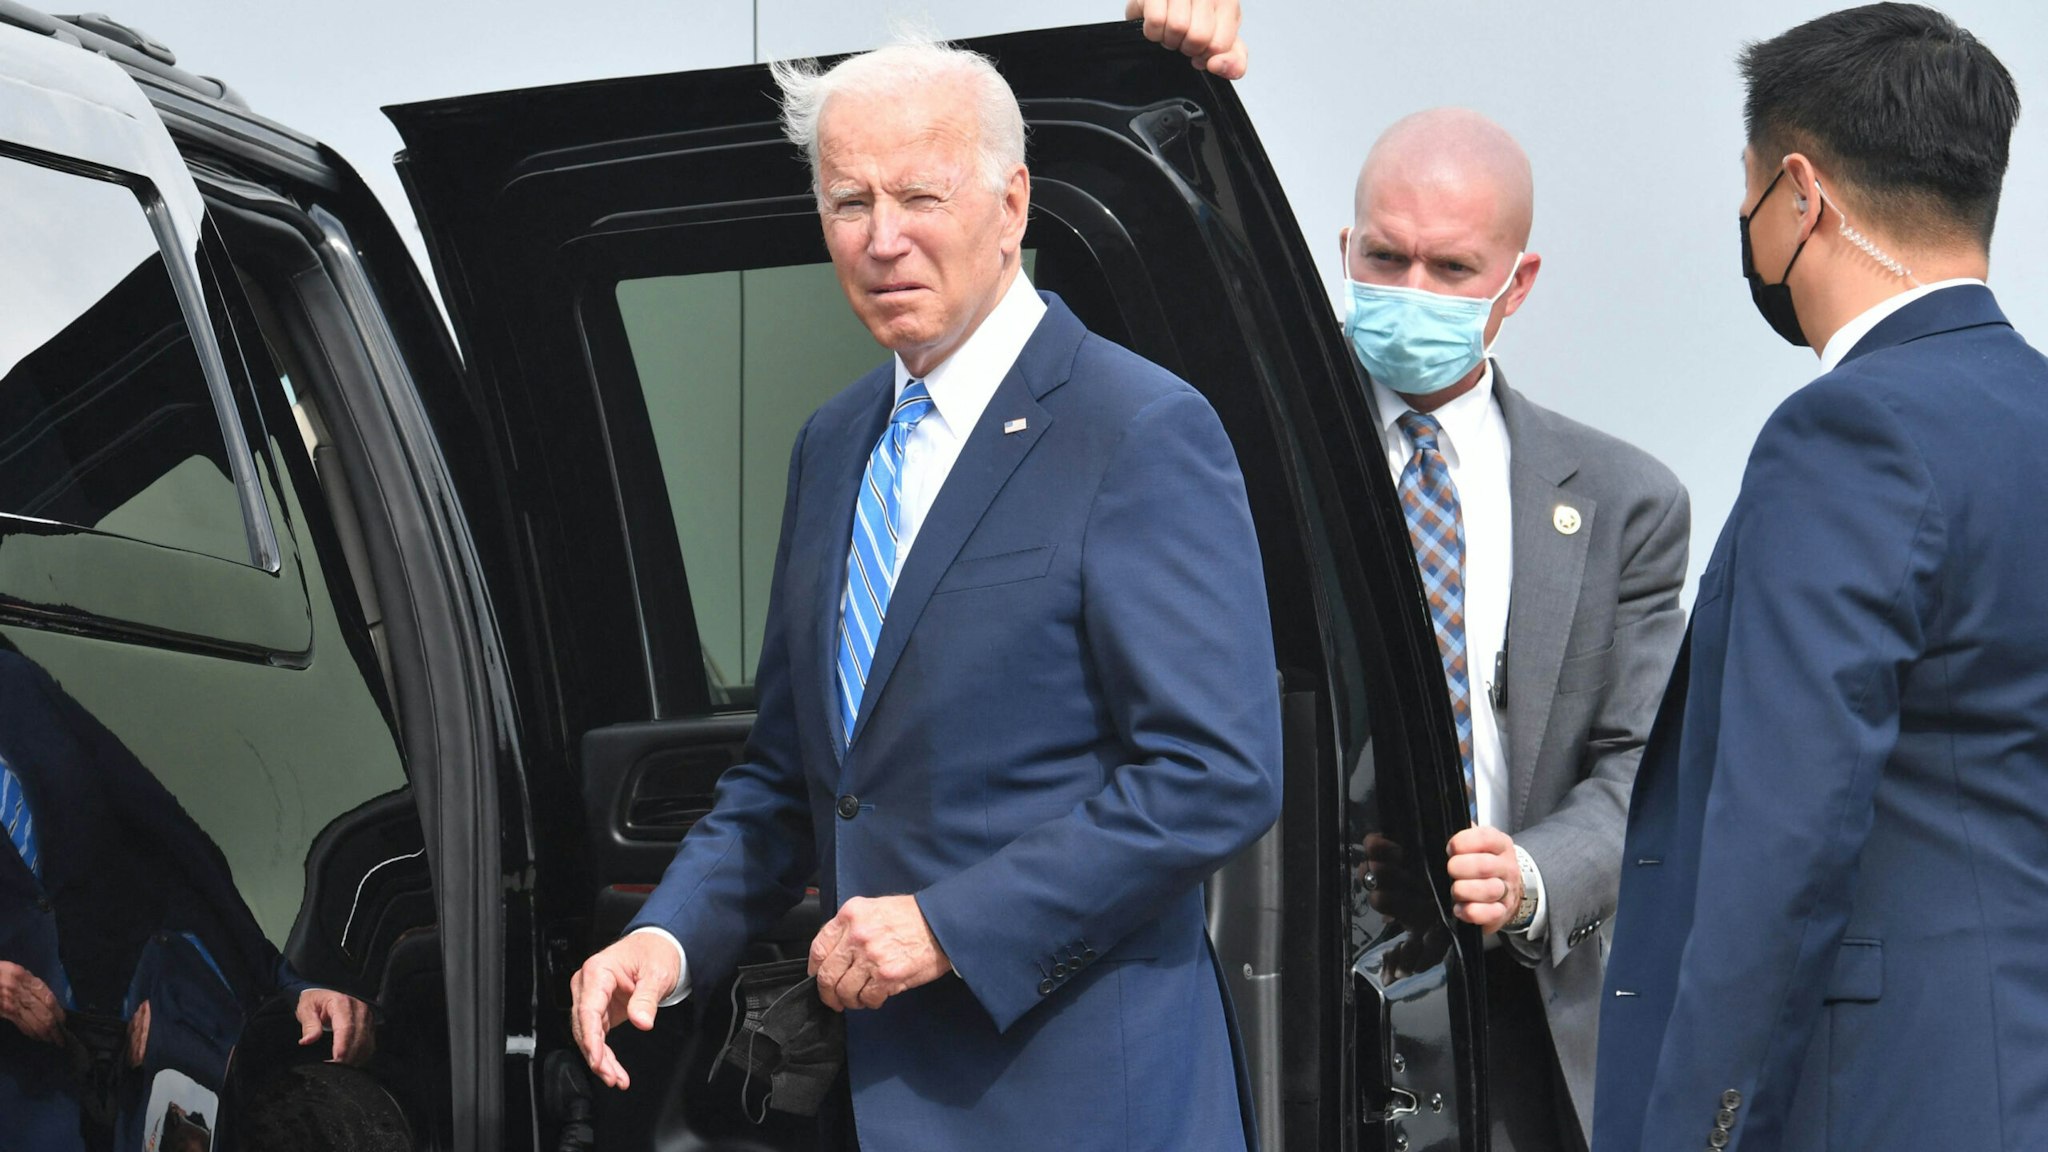 US President Joe Biden looks on after arriving on Airforce One at Chicago OHare International Airport in Chicago, Illinois on October 7, 2021, as he travels to promote the importance of Covid-19 vaccine requirements.